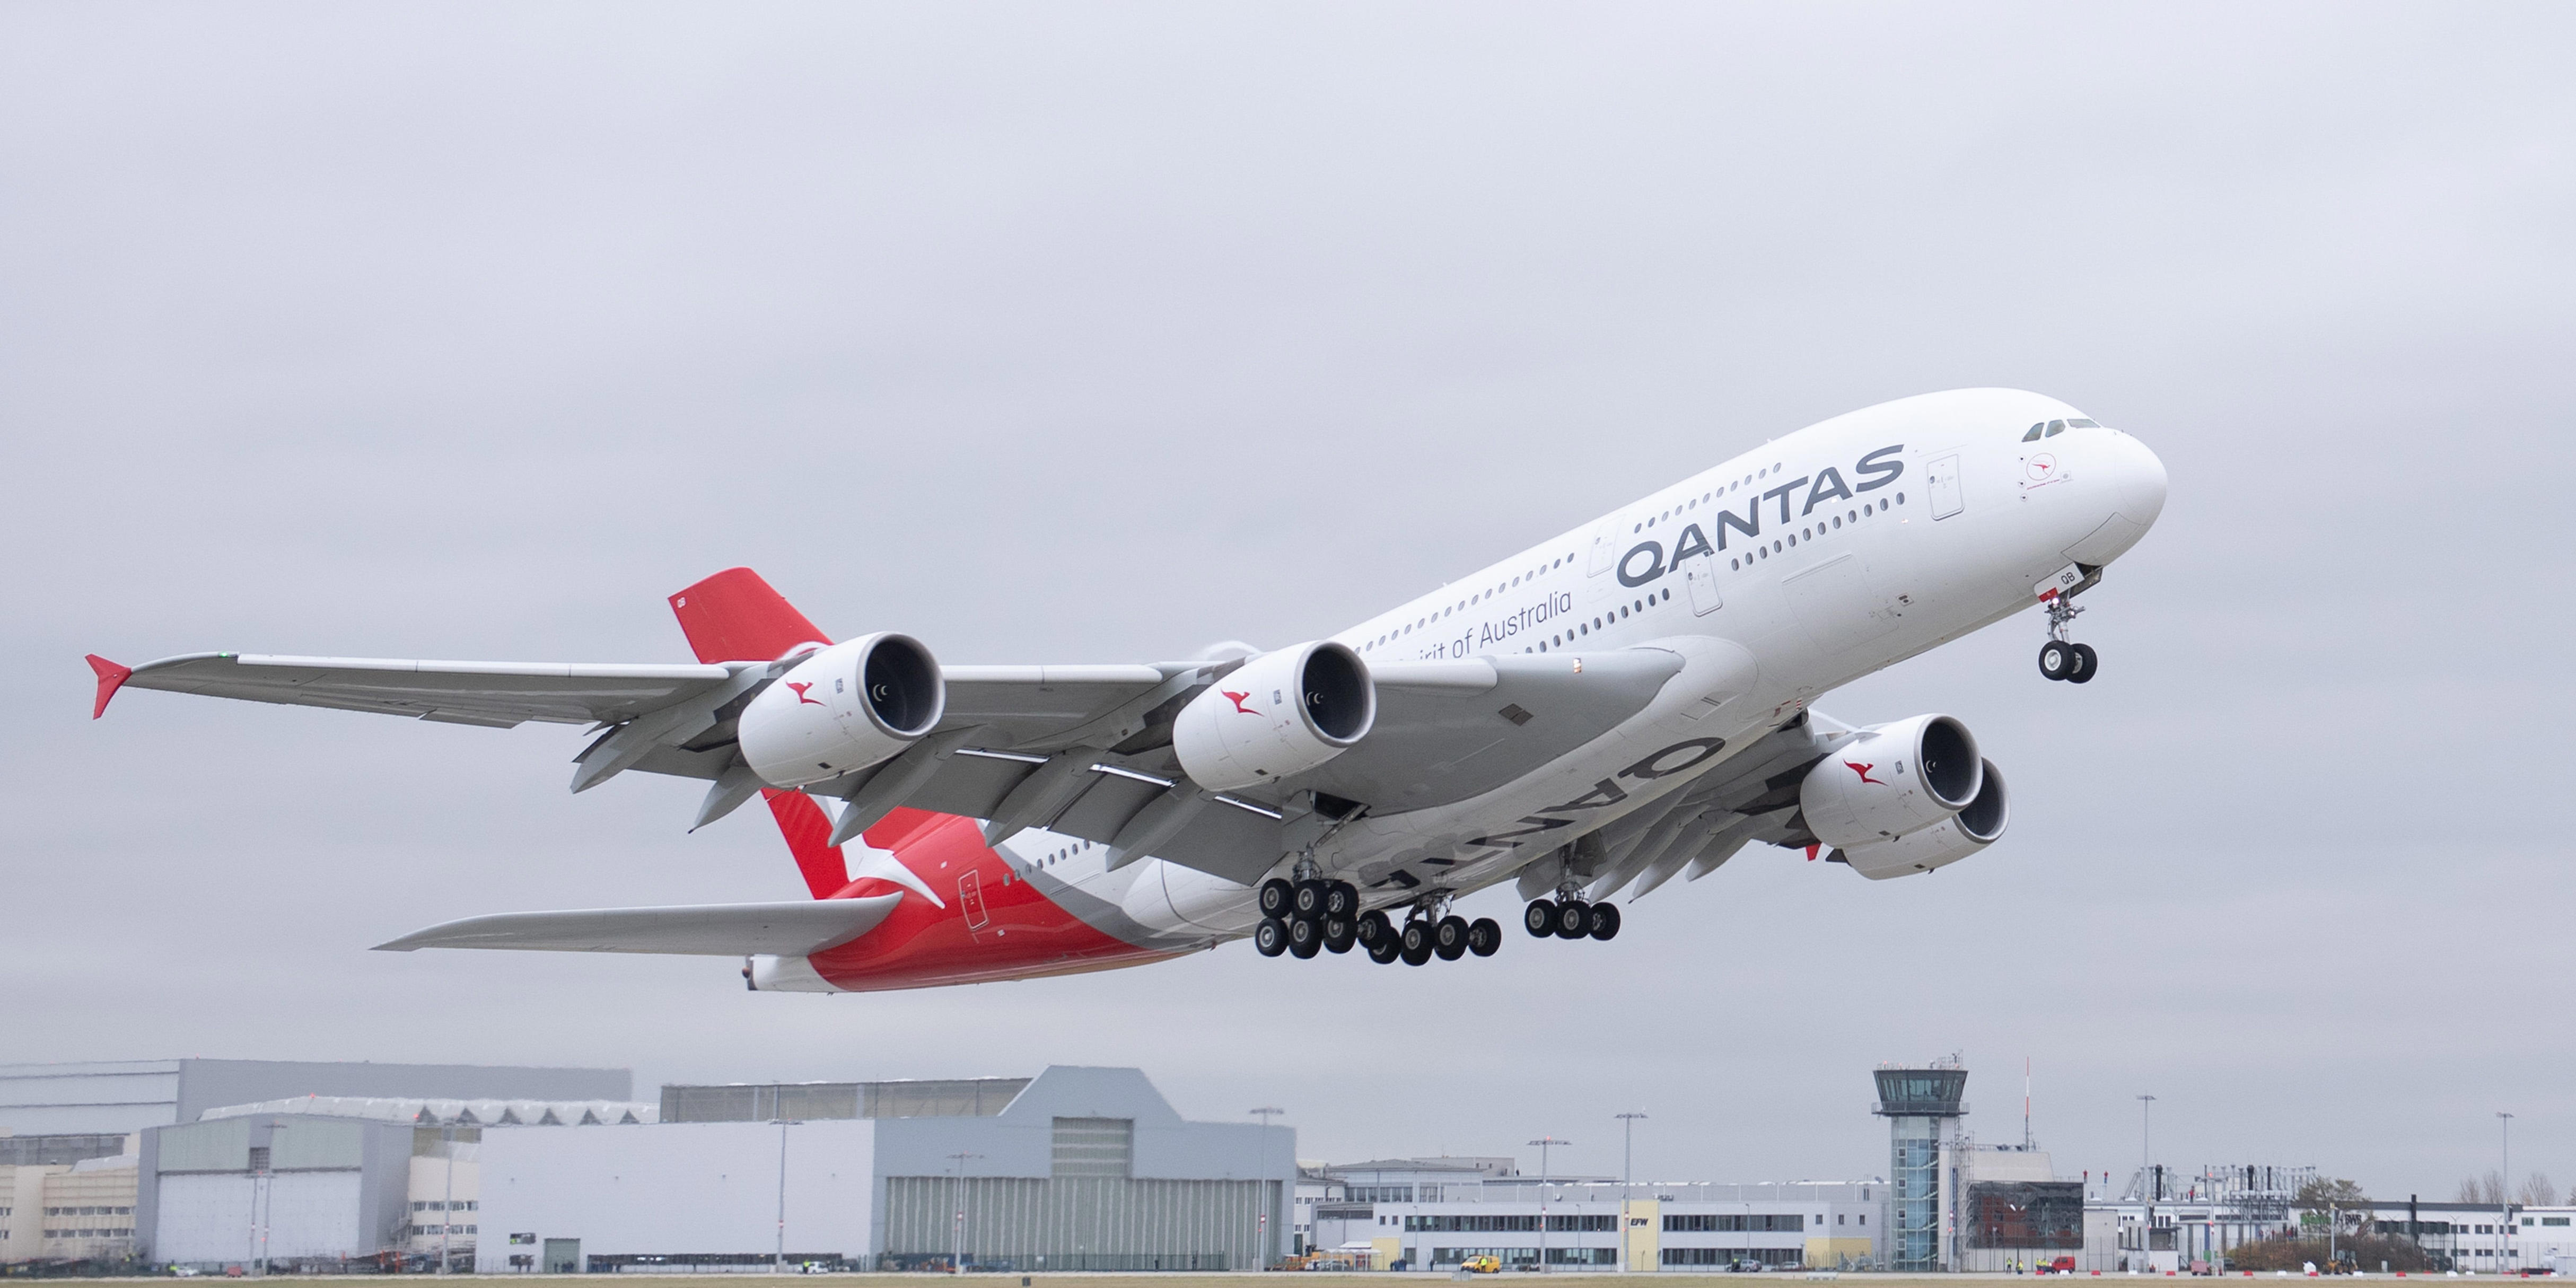 microsoft, qantas will pay up to about $79 million to resolve claims it sold tickets for canceled flights